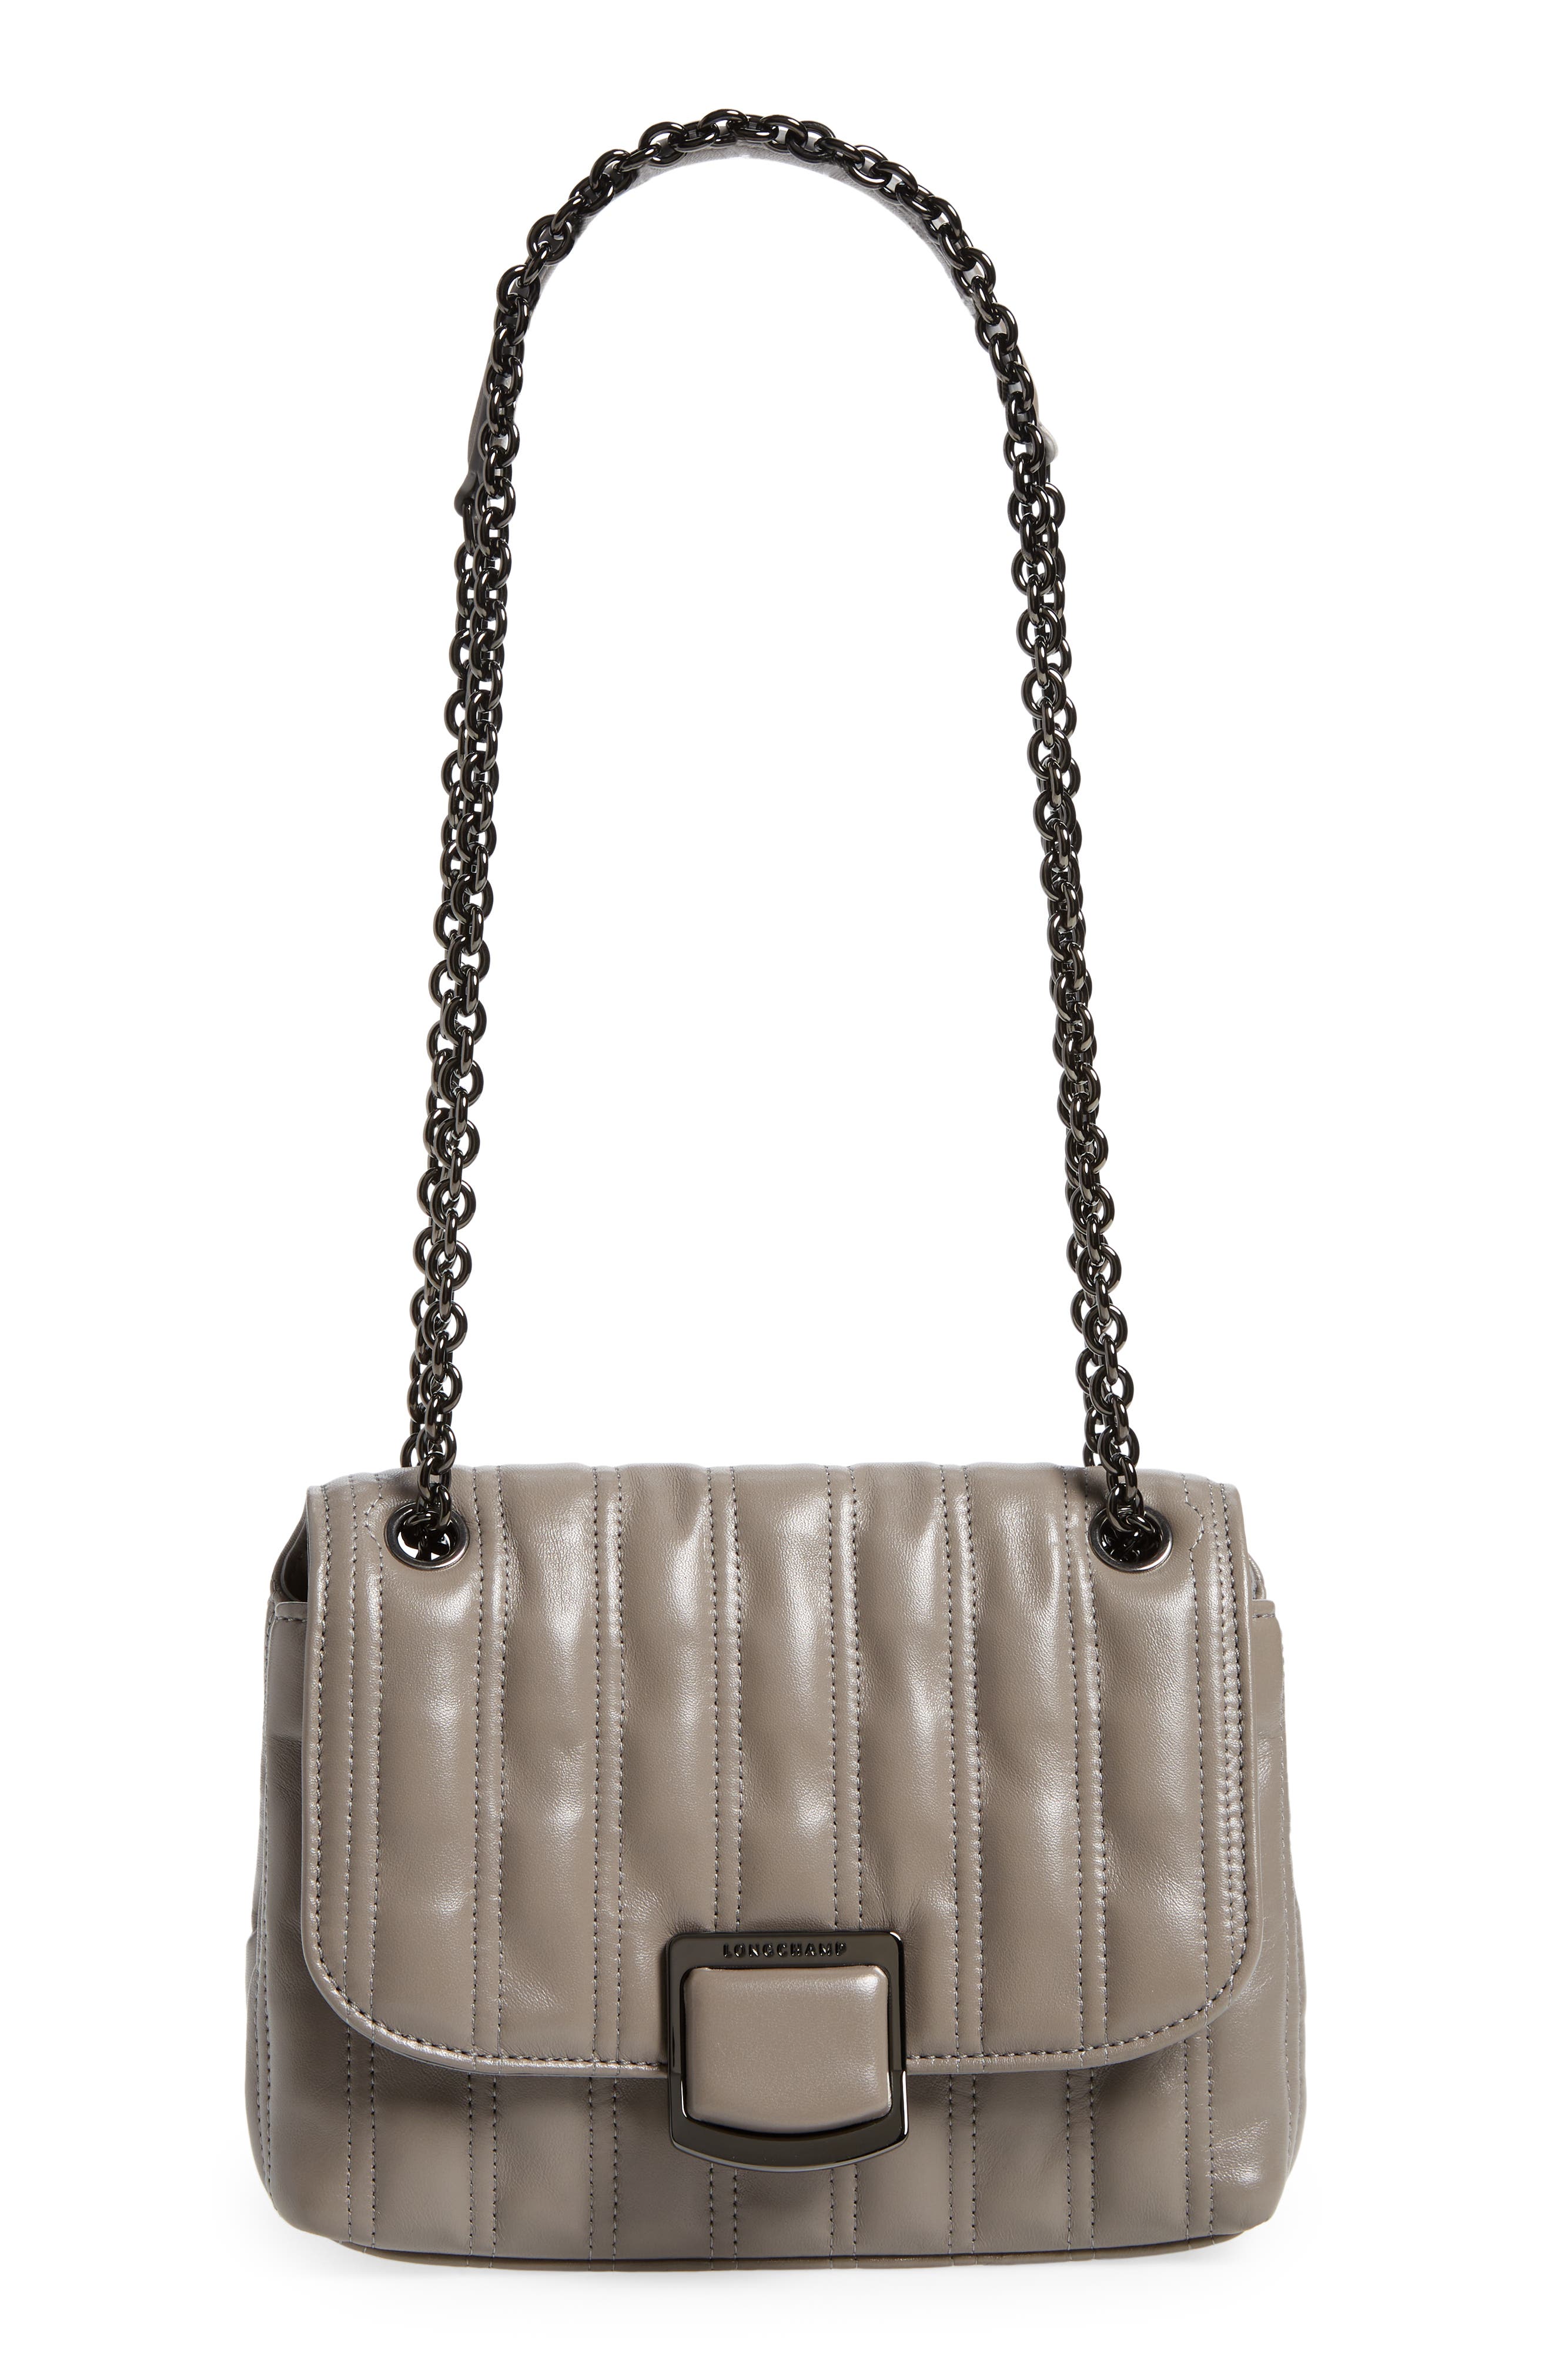 Longchamp Brioche Small Leather Shoulder Bag in Turtle Dove at Nordstrom